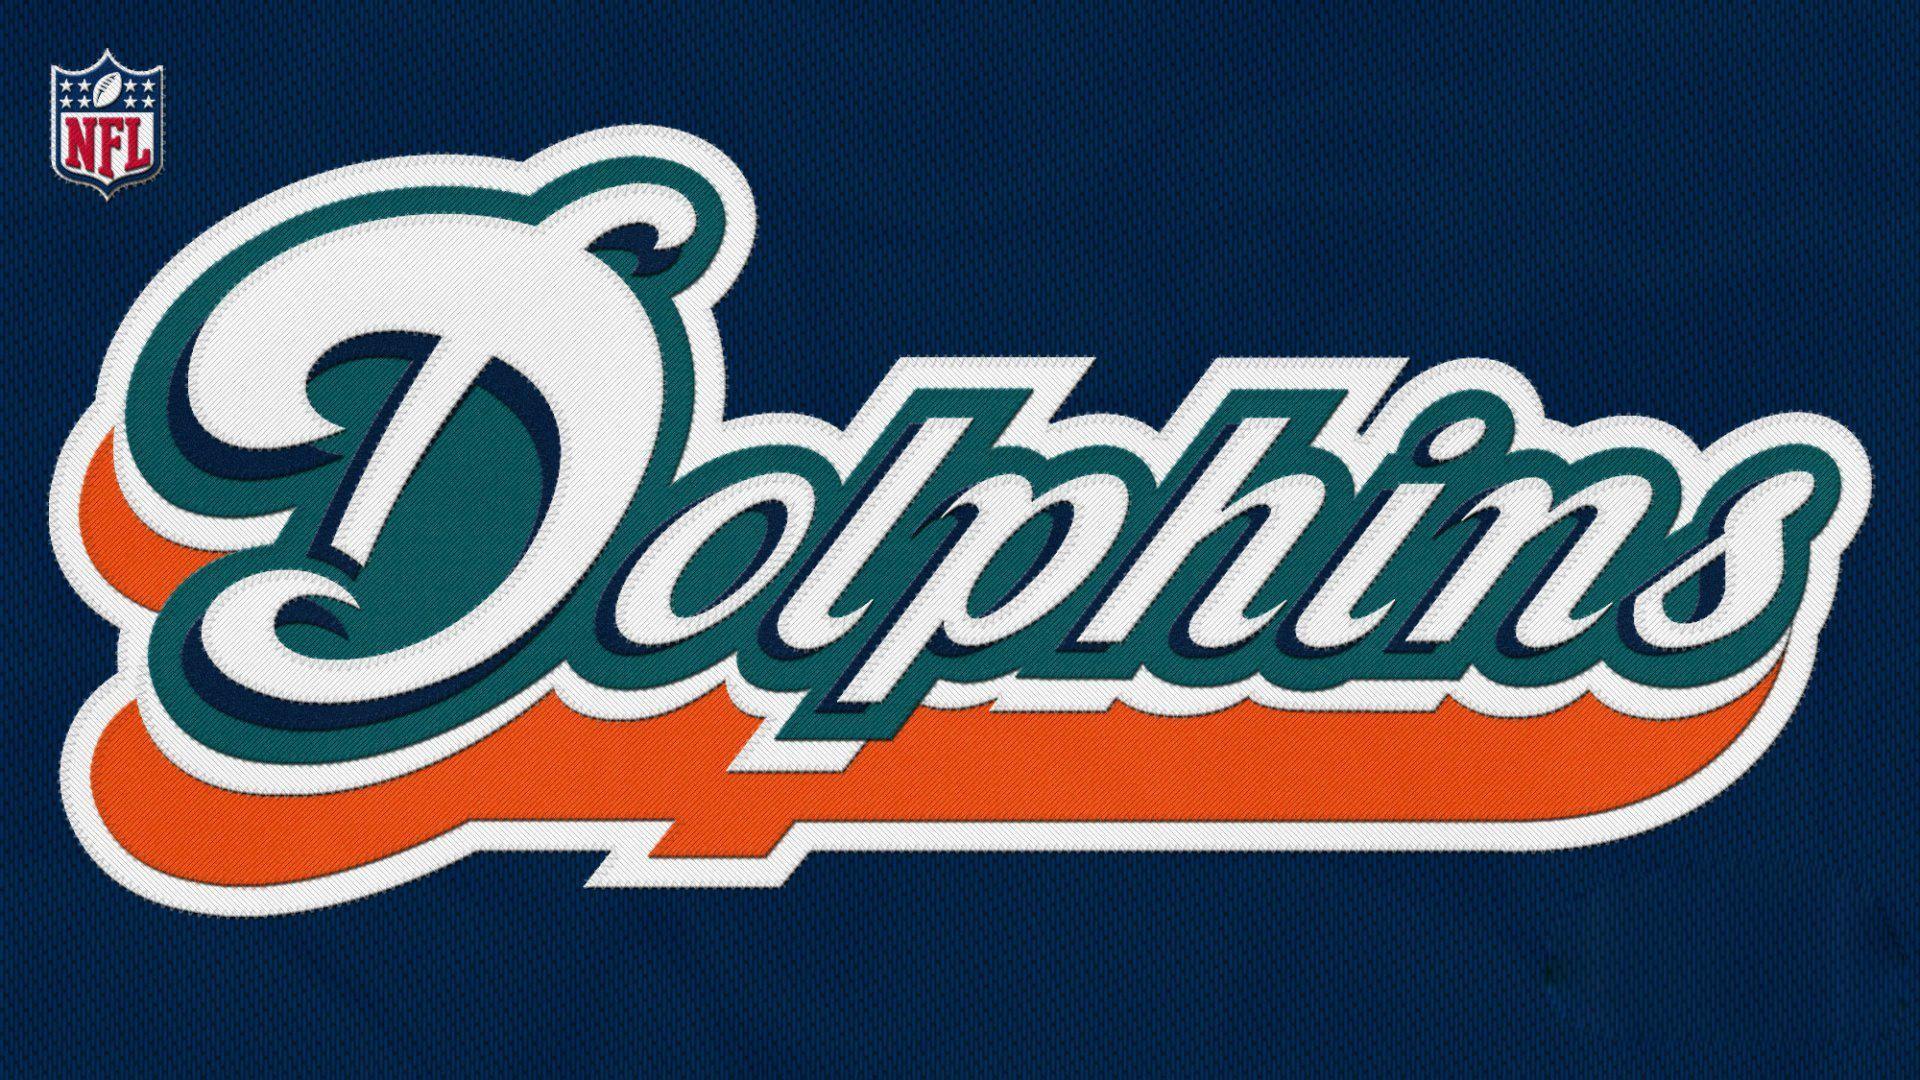 Miami Dolphins Wallpaper iPhone